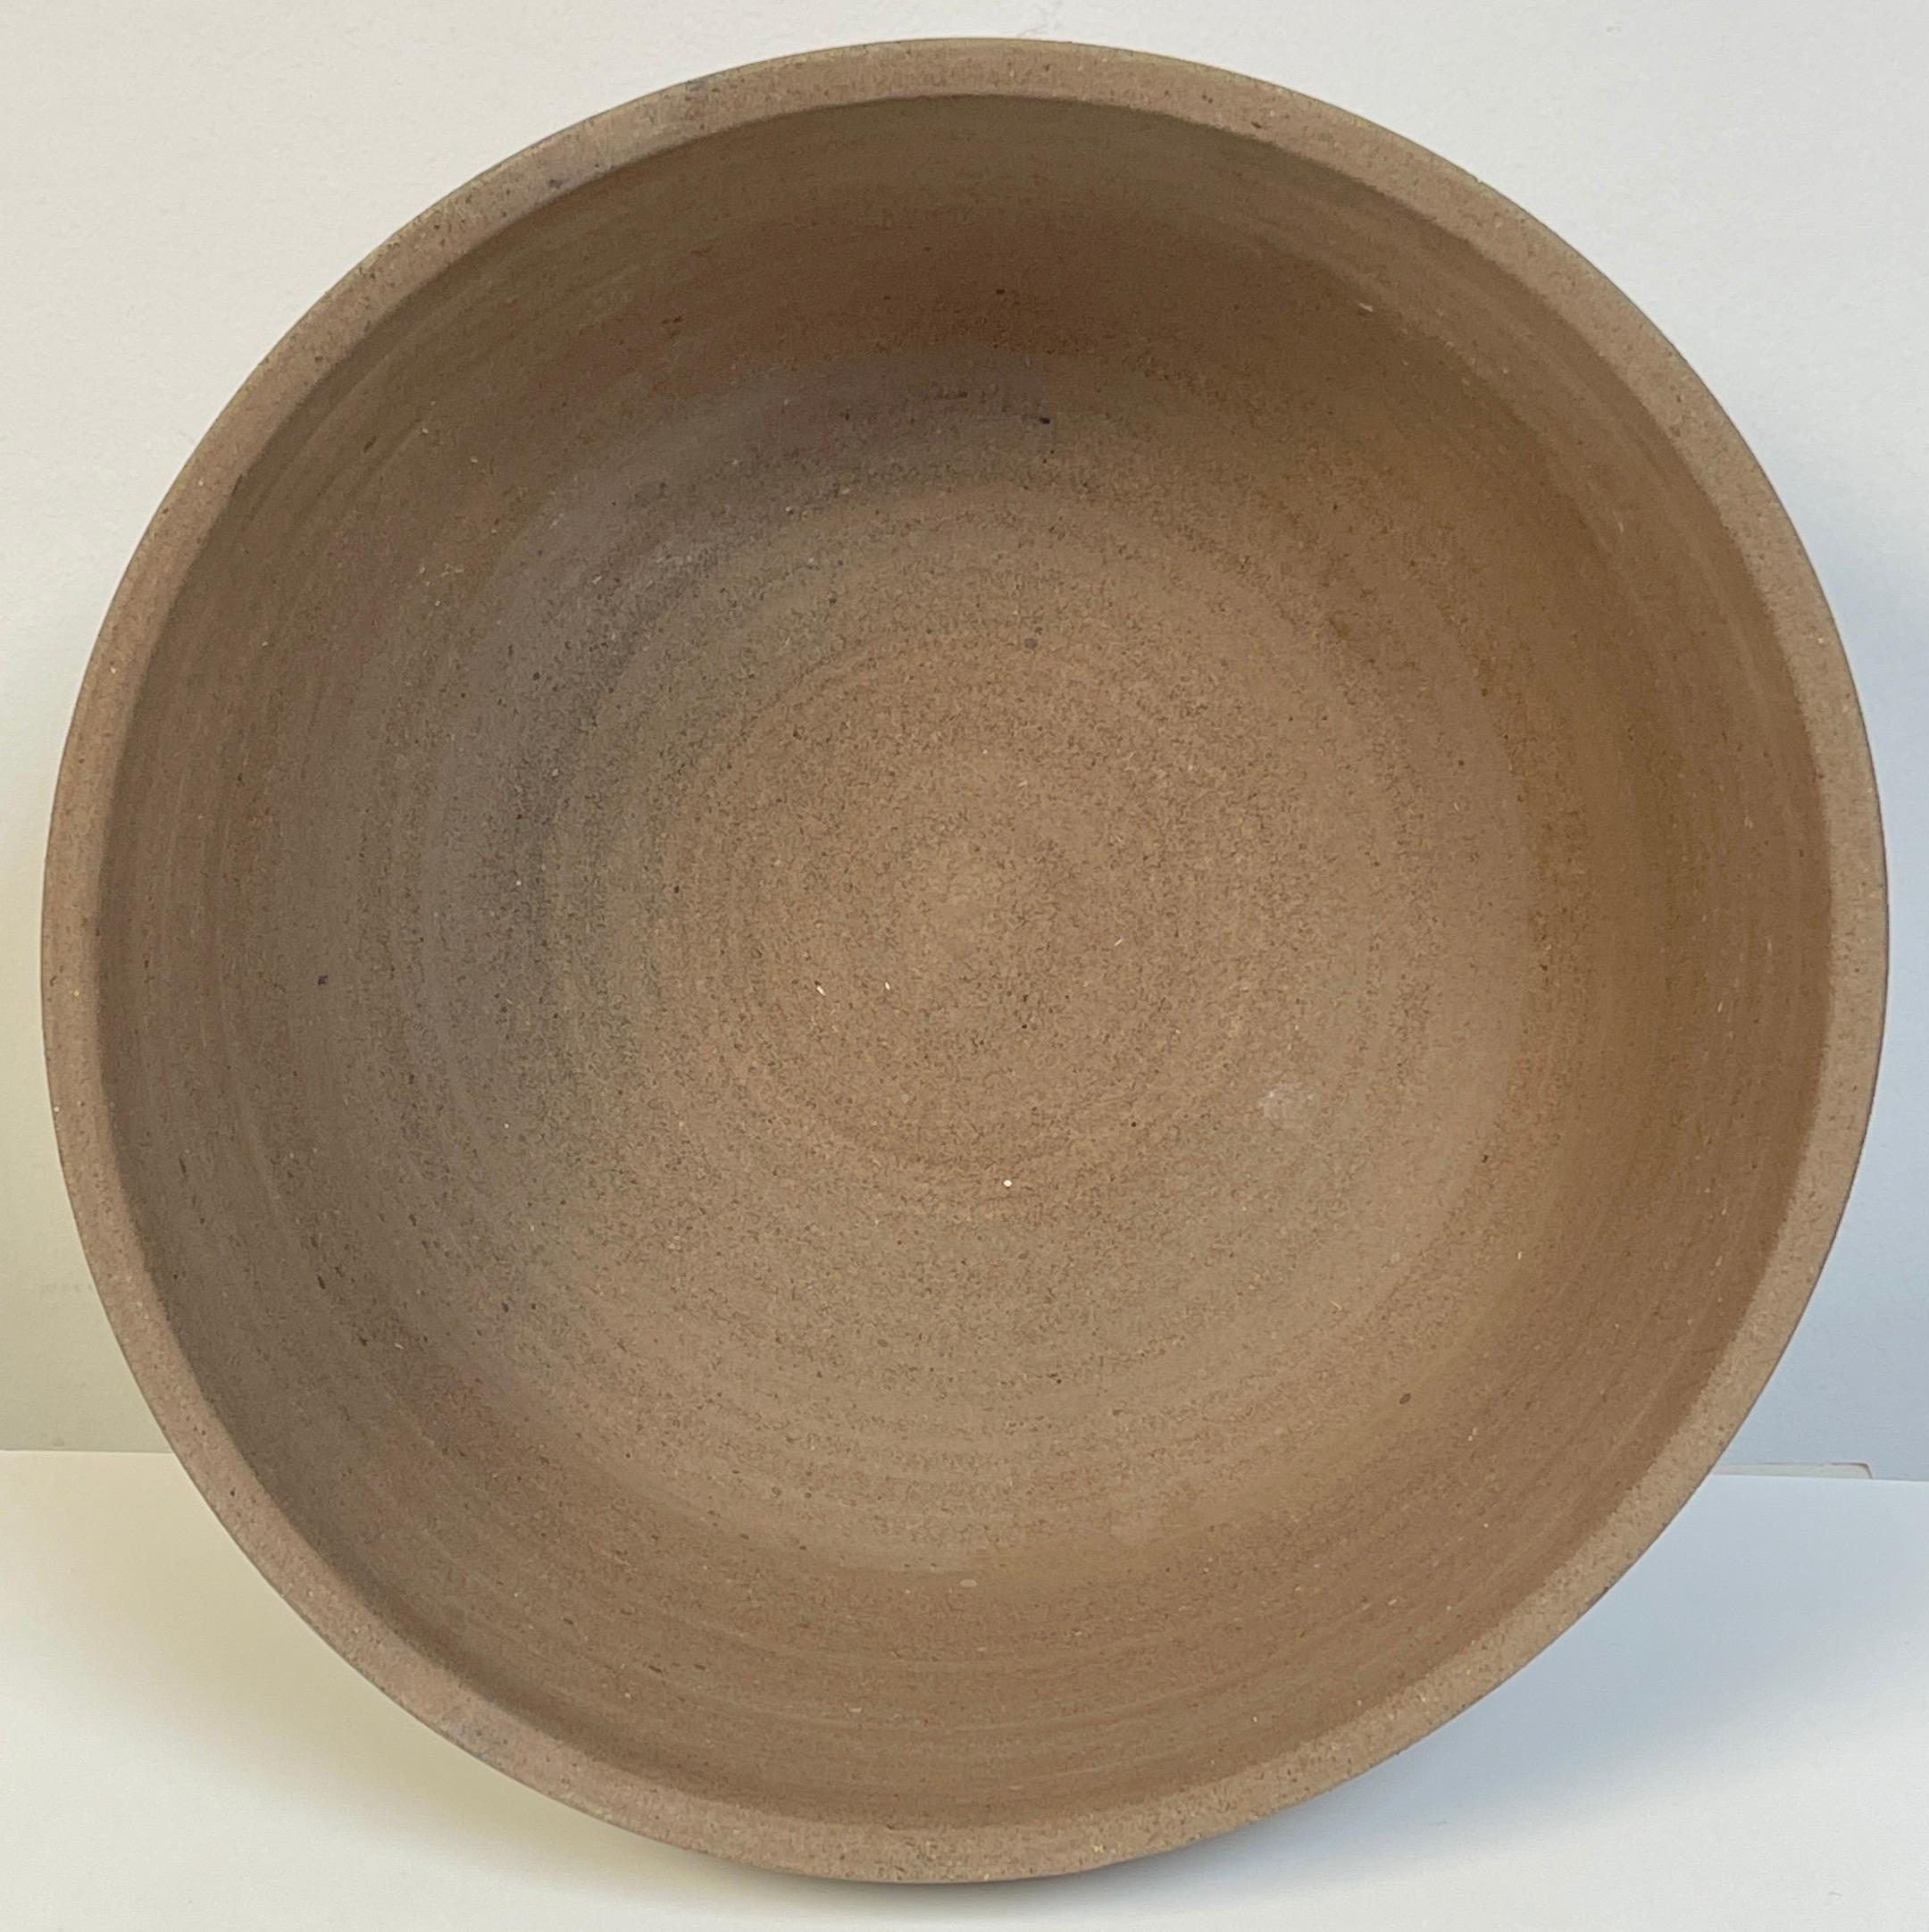 Engraved Bruno Gambone Large Incised Pottery Centerbowl, circa 1970s